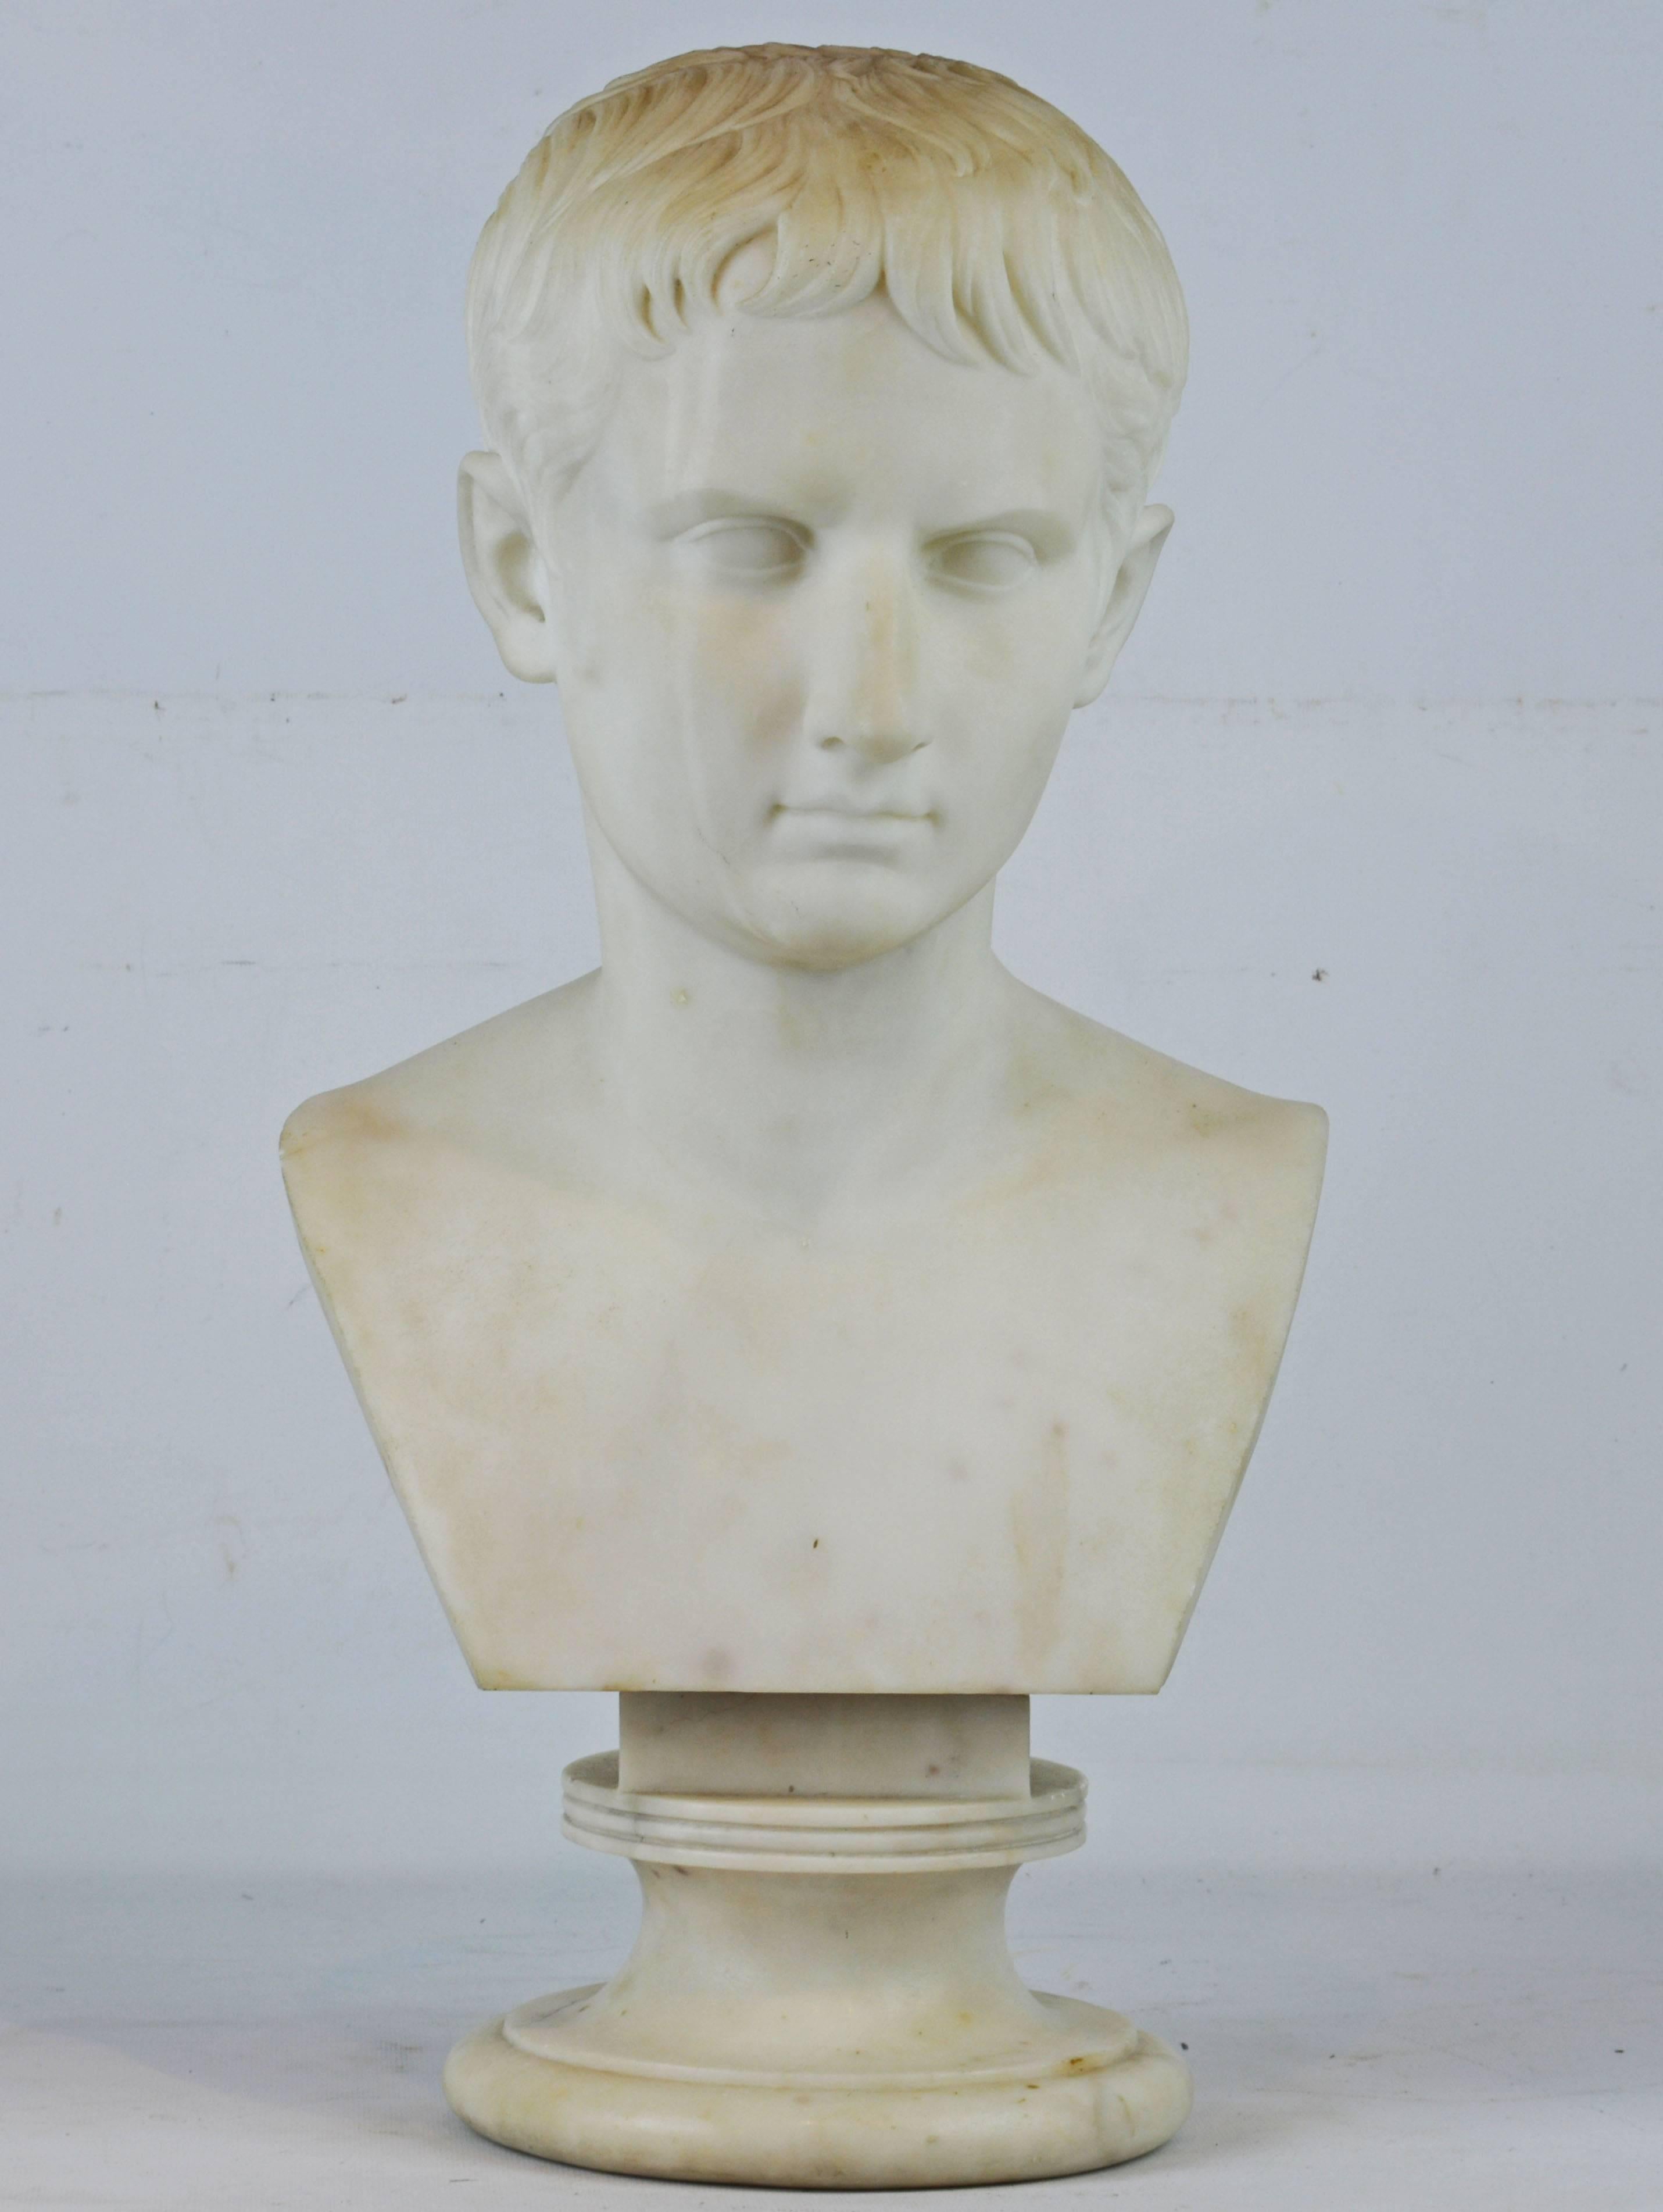 Standing 22 inches tall the white Carrara marble bust of the Young Octavian rests on a waisted circular base and is of Italian origin carved after the antique' Young Octavian' end of 1st century BC, now in the Vatican Museums - Pius Clementinus